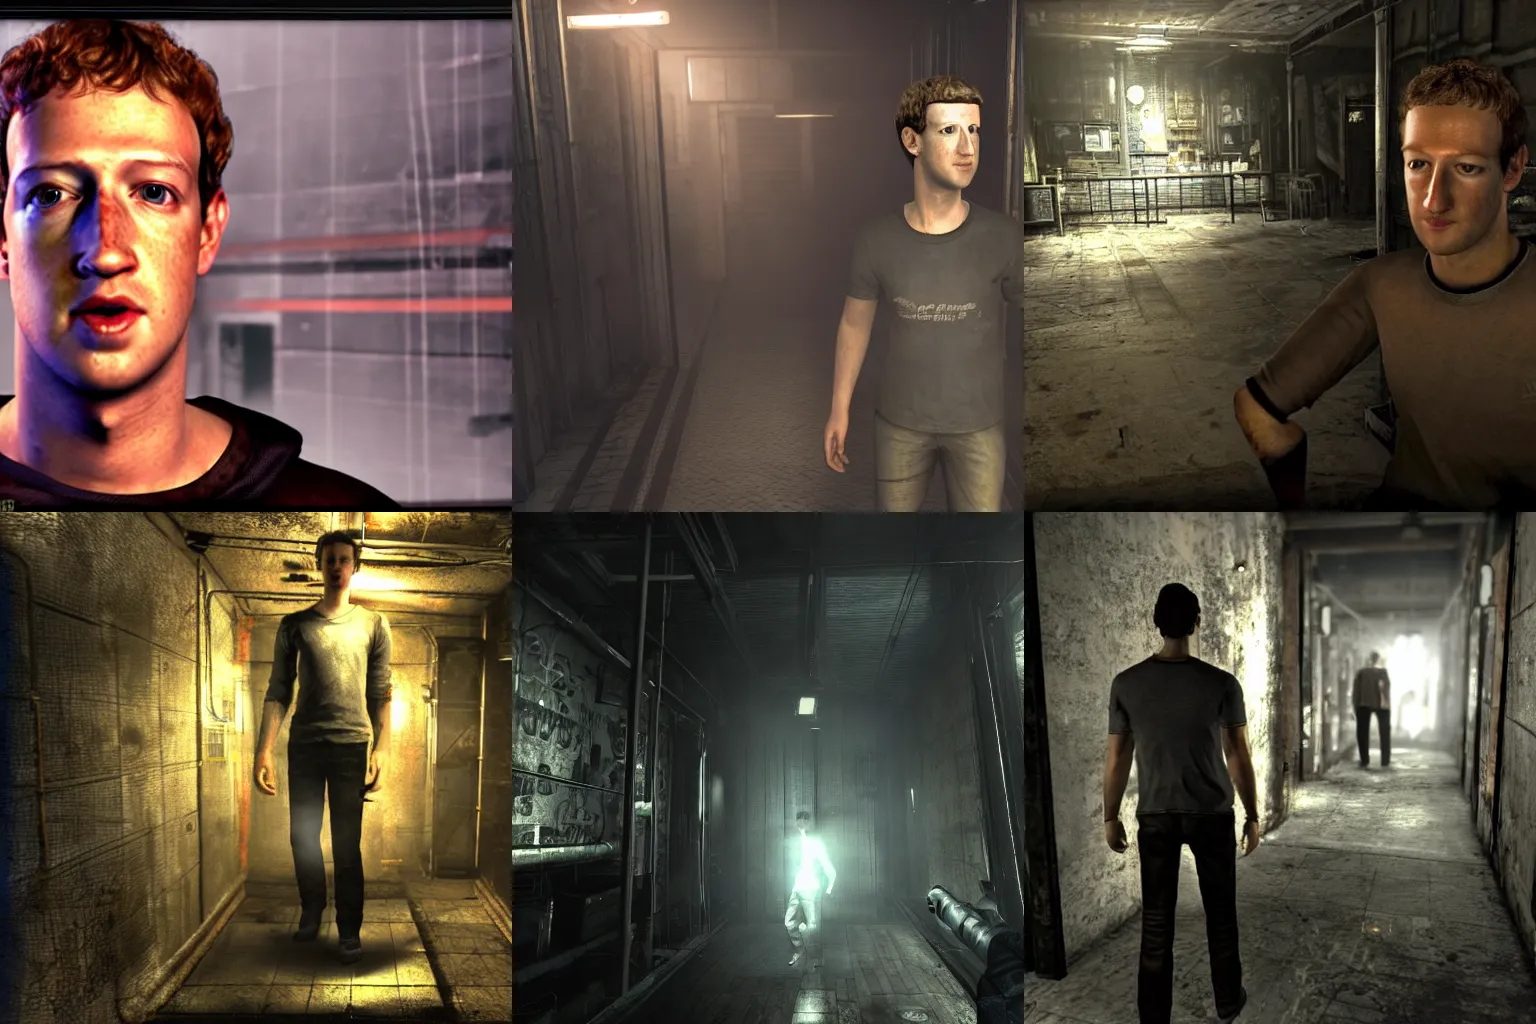 Prompt: Screenshot of Mark Zuckerberg in Amnesia by Frictional Games